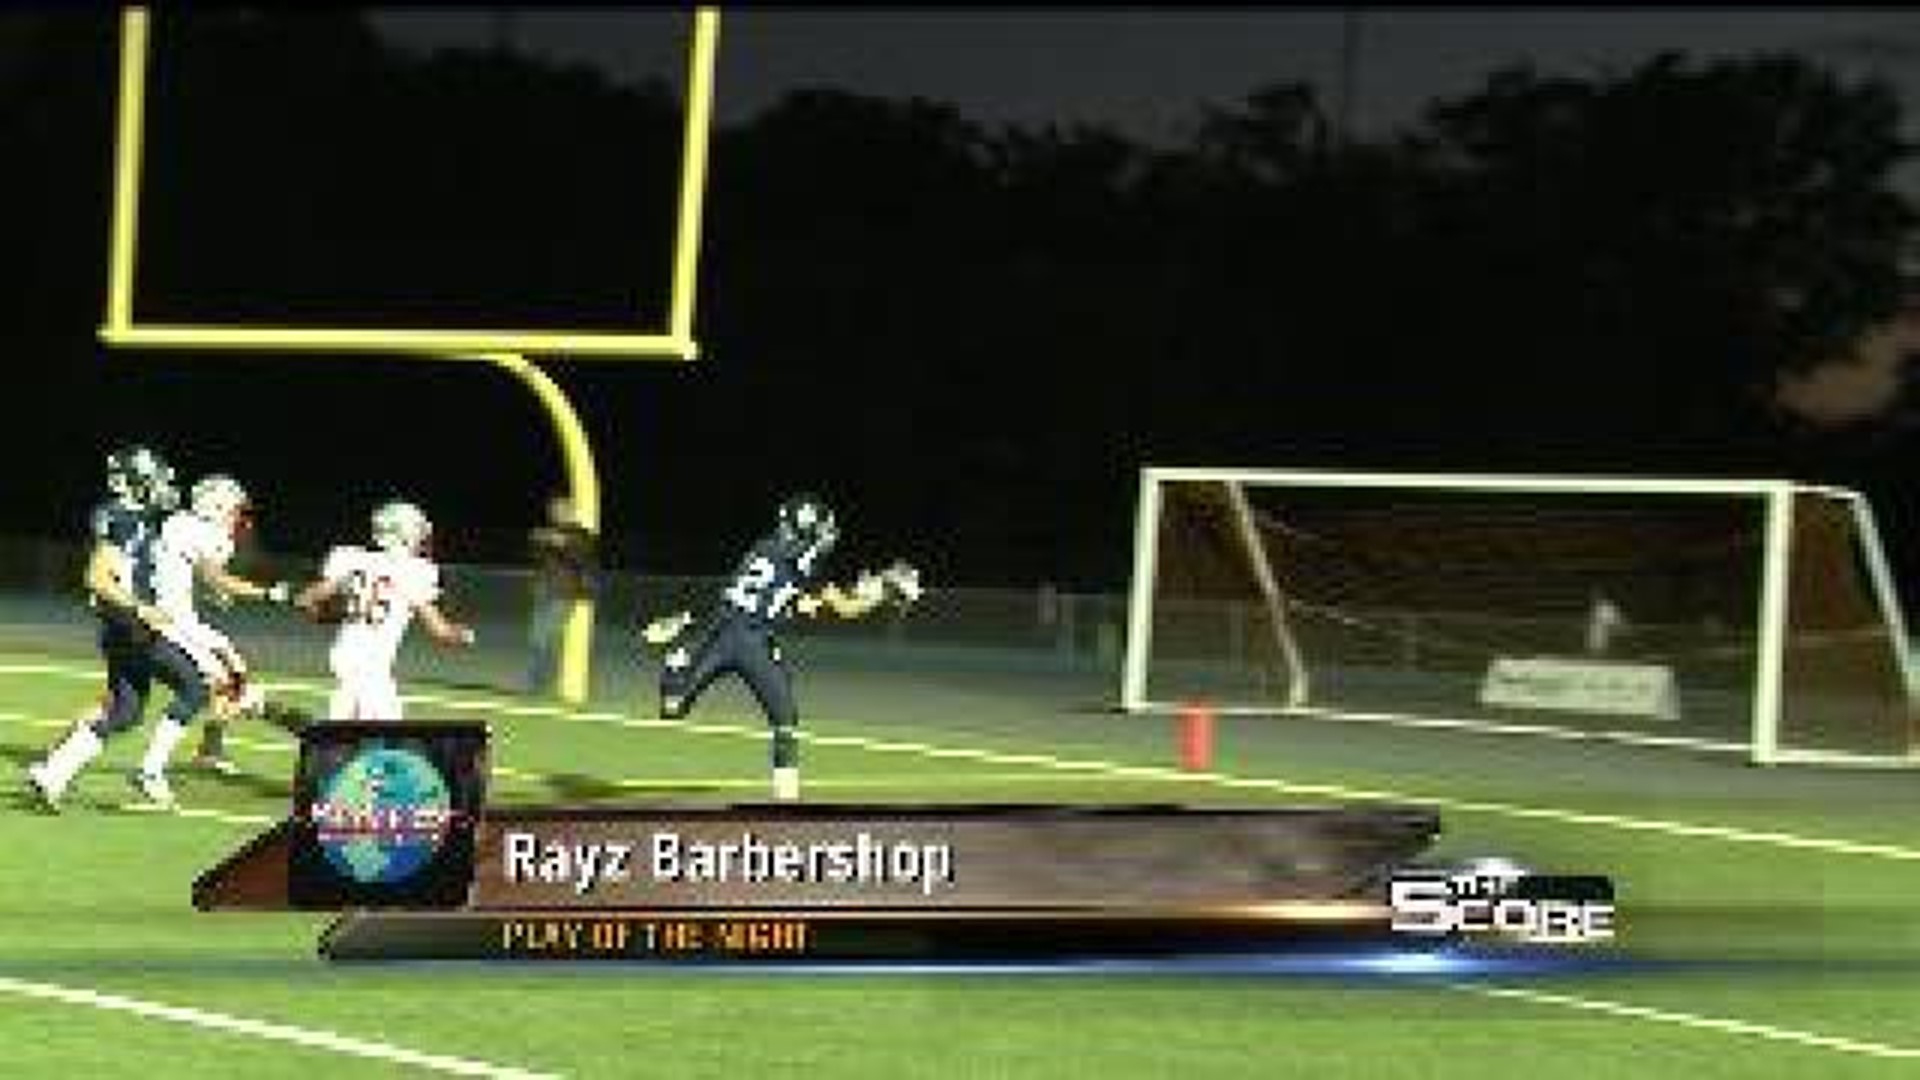 Rayz Barber Shop Play of the Night